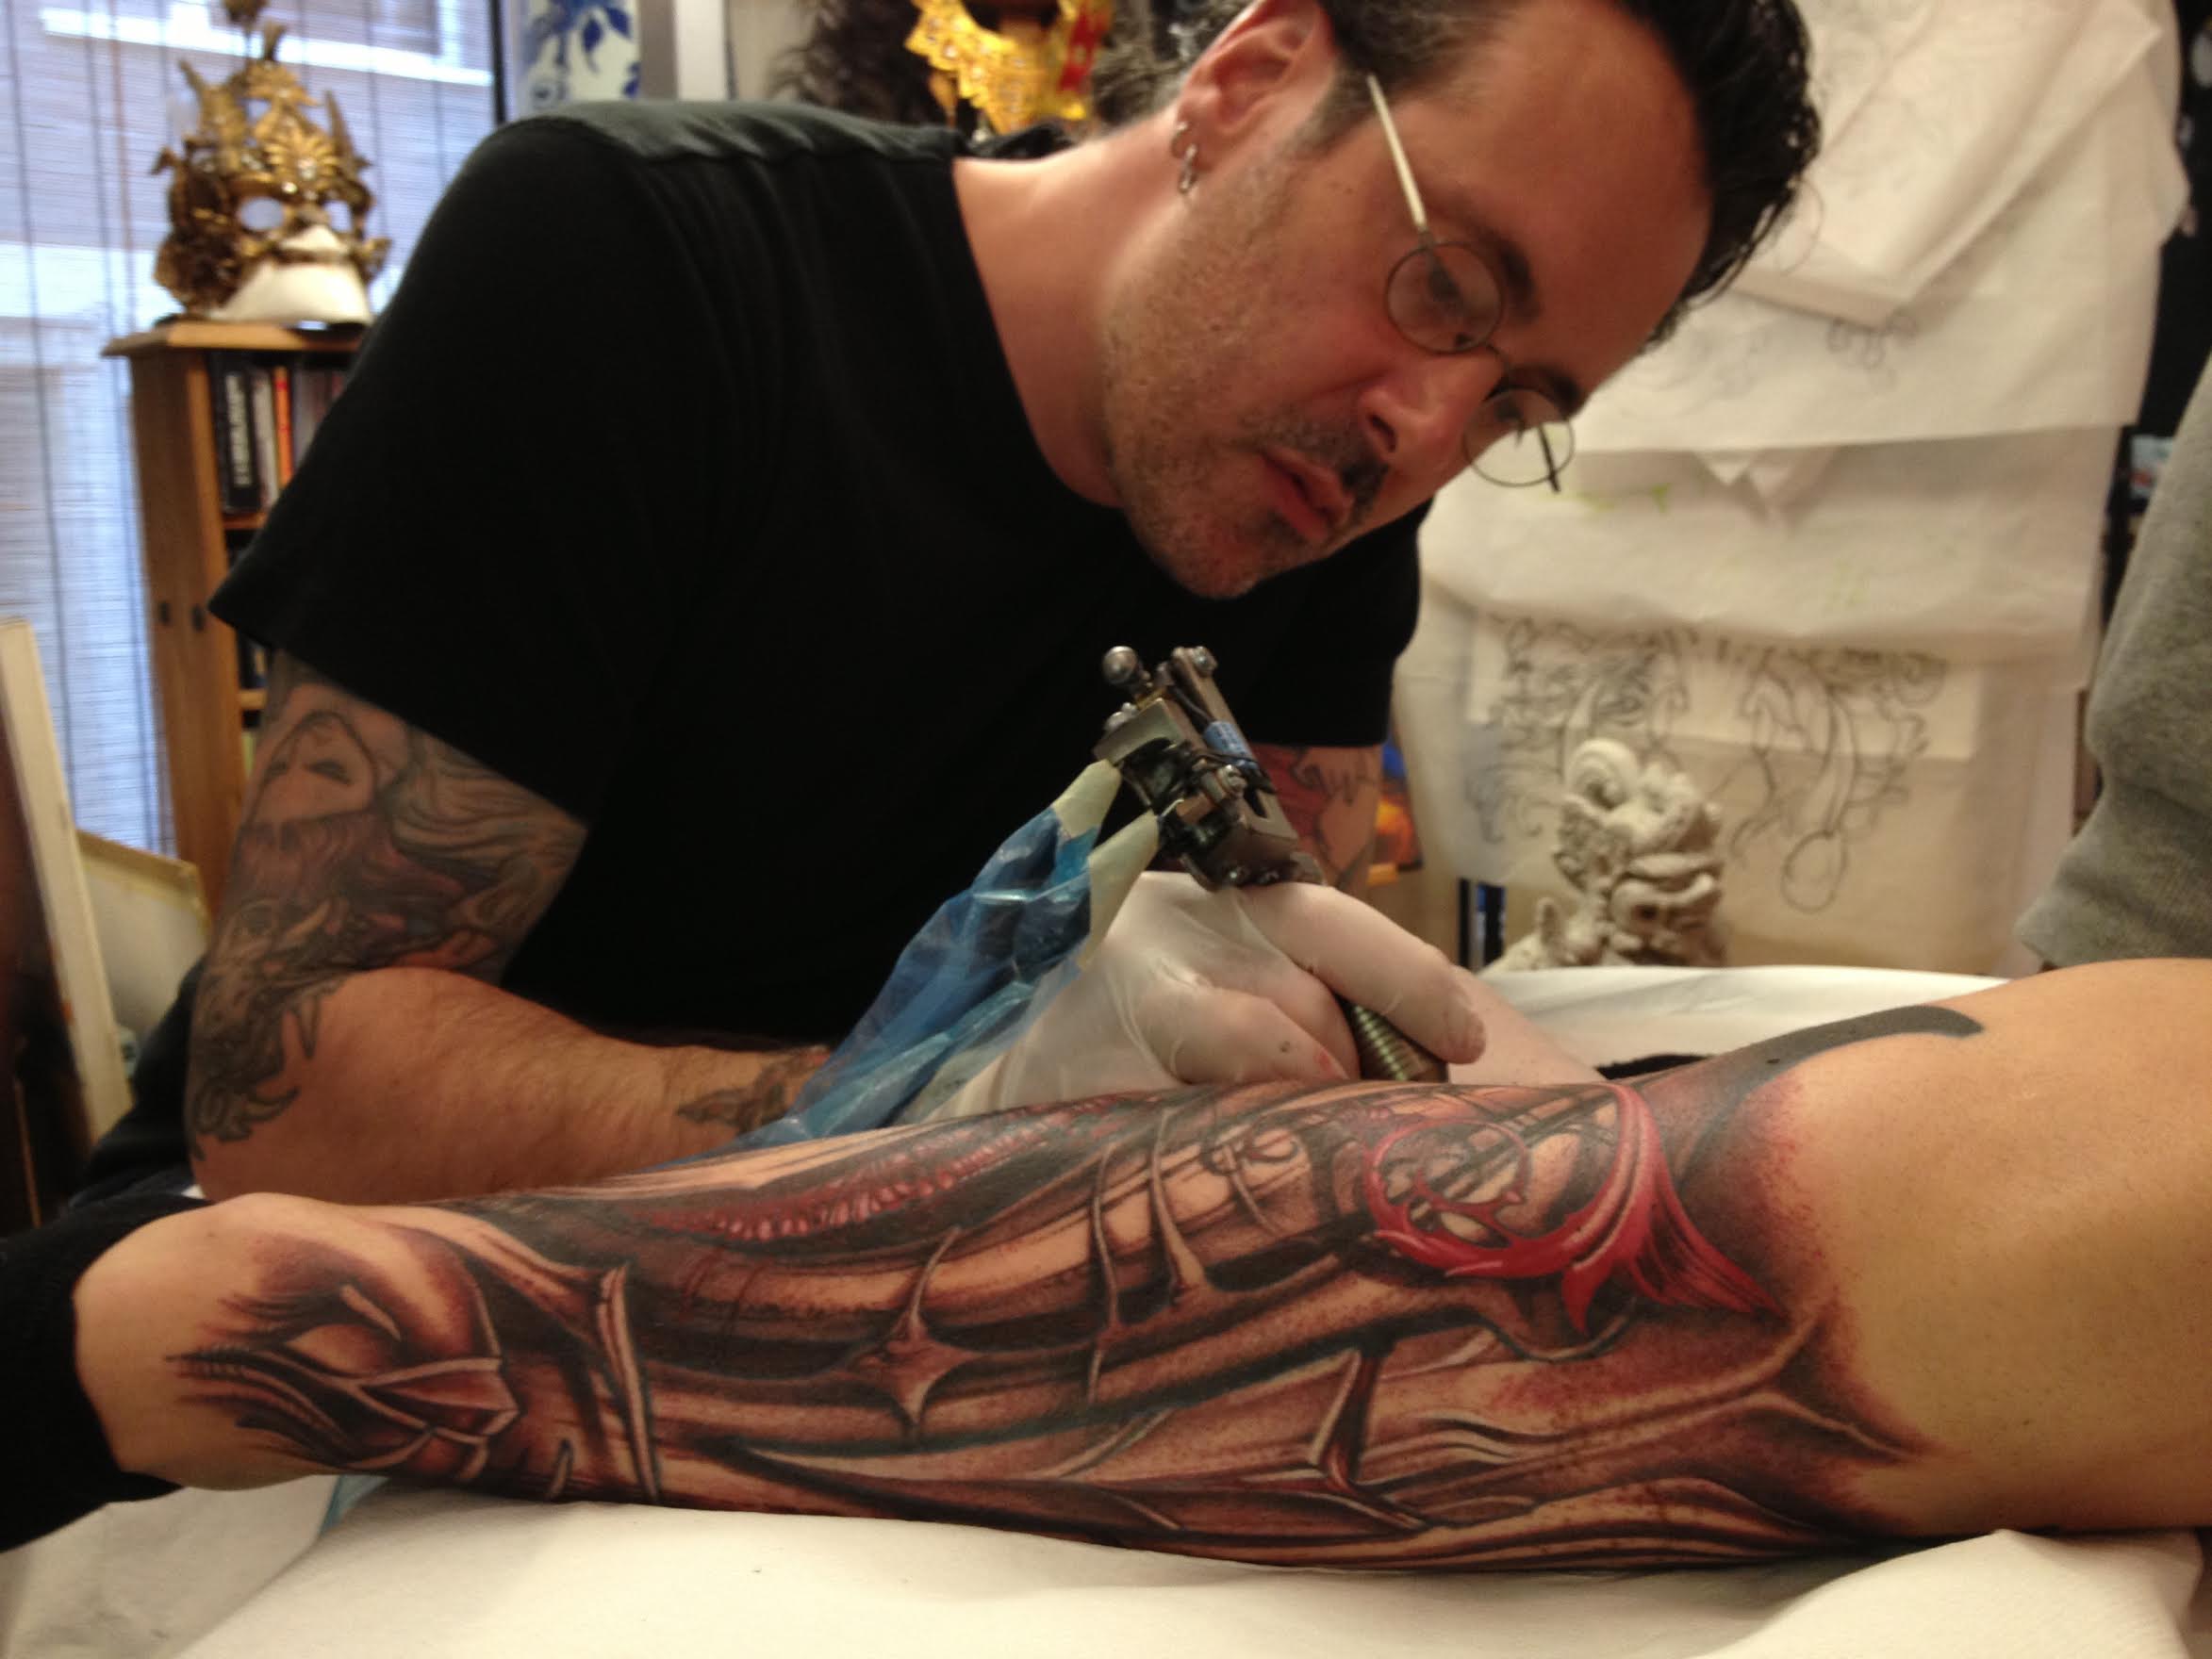 Rob Koss, who founded the XXXtattoo studio in Lucerne